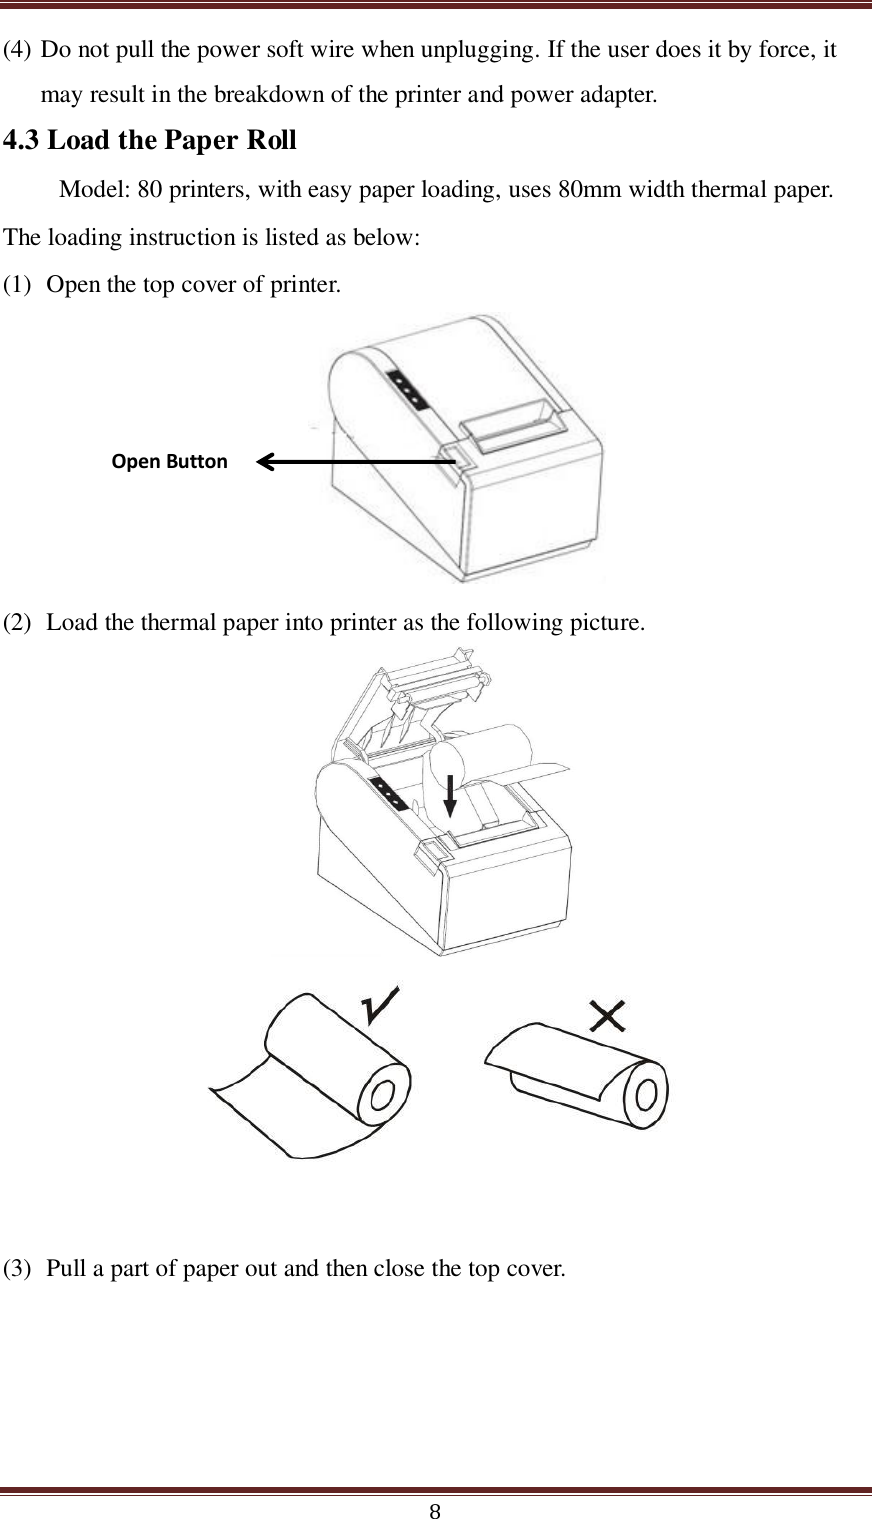  8 (4) Do not pull the power soft wire when unplugging. If the user does it by force, it may result in the breakdown of the printer and power adapter. 4.3 Load the Paper Roll Model: 80 printers, with easy paper loading, uses 80mm width thermal paper. The loading instruction is listed as below: (1) Open the top cover of printer.   (2) Load the thermal paper into printer as the following picture.        (3) Pull a part of paper out and then close the top cover.  Open Button 